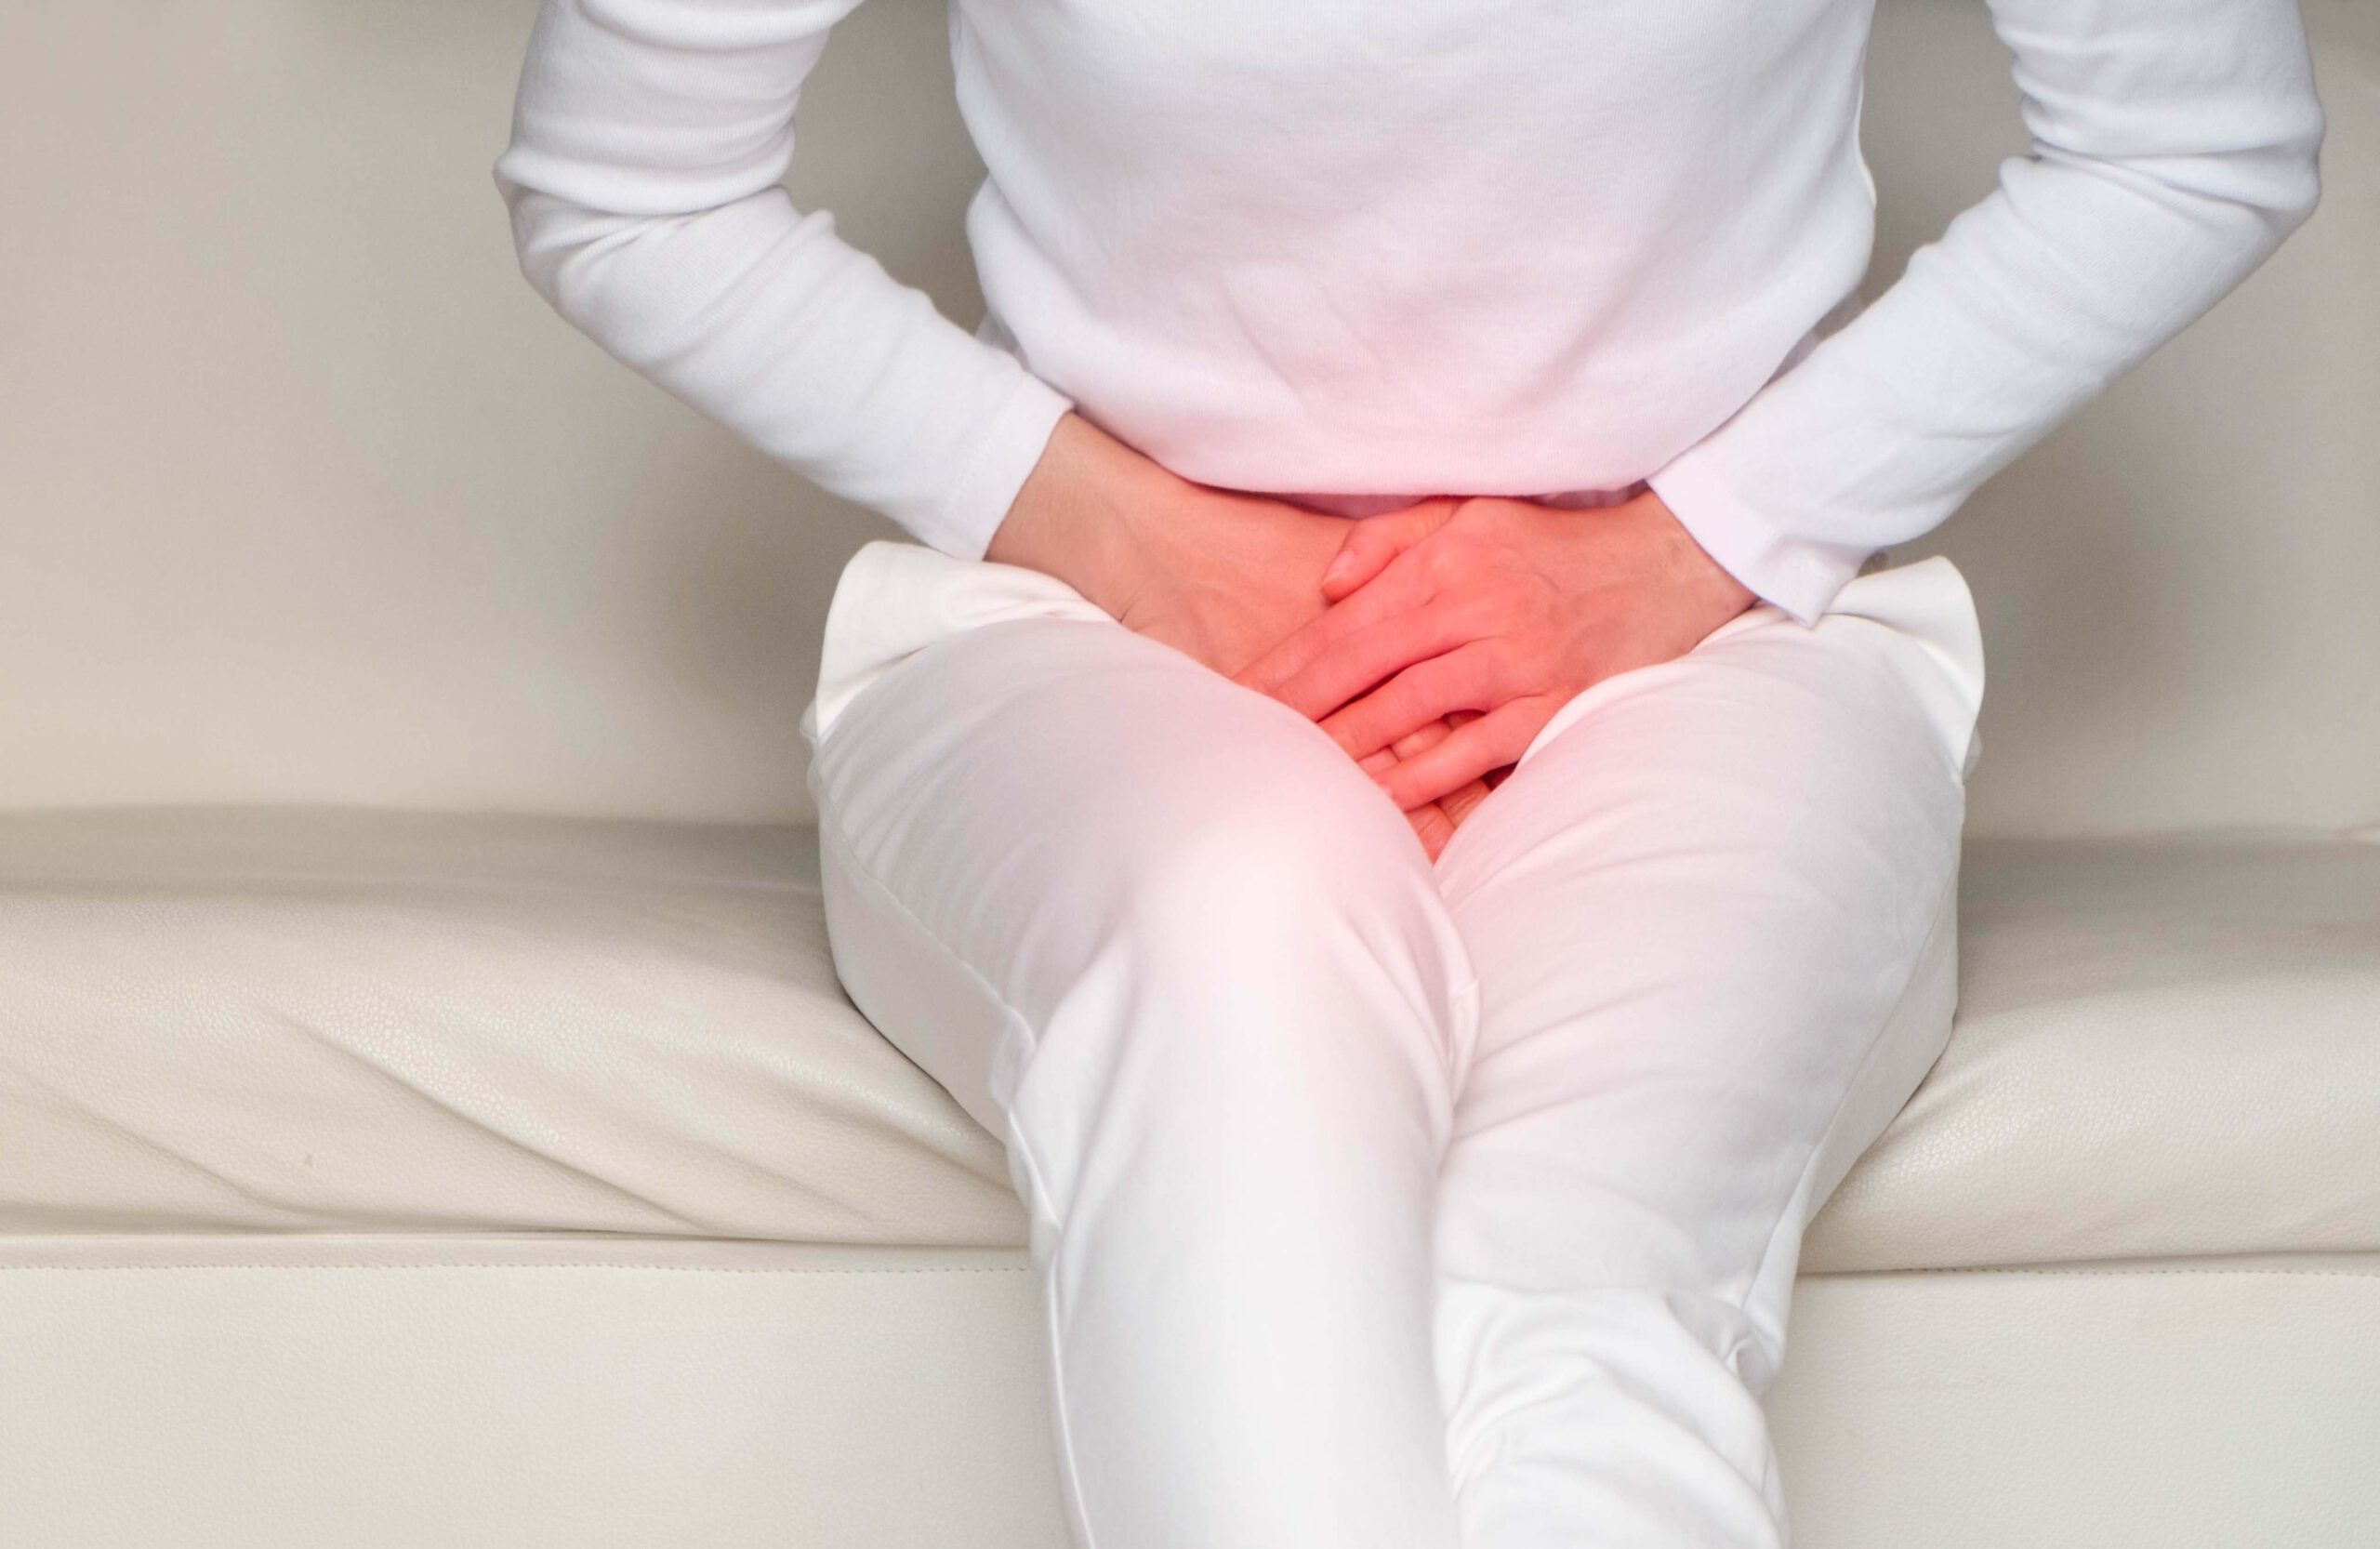 Urinary Incontinence: Symptoms & Treatment